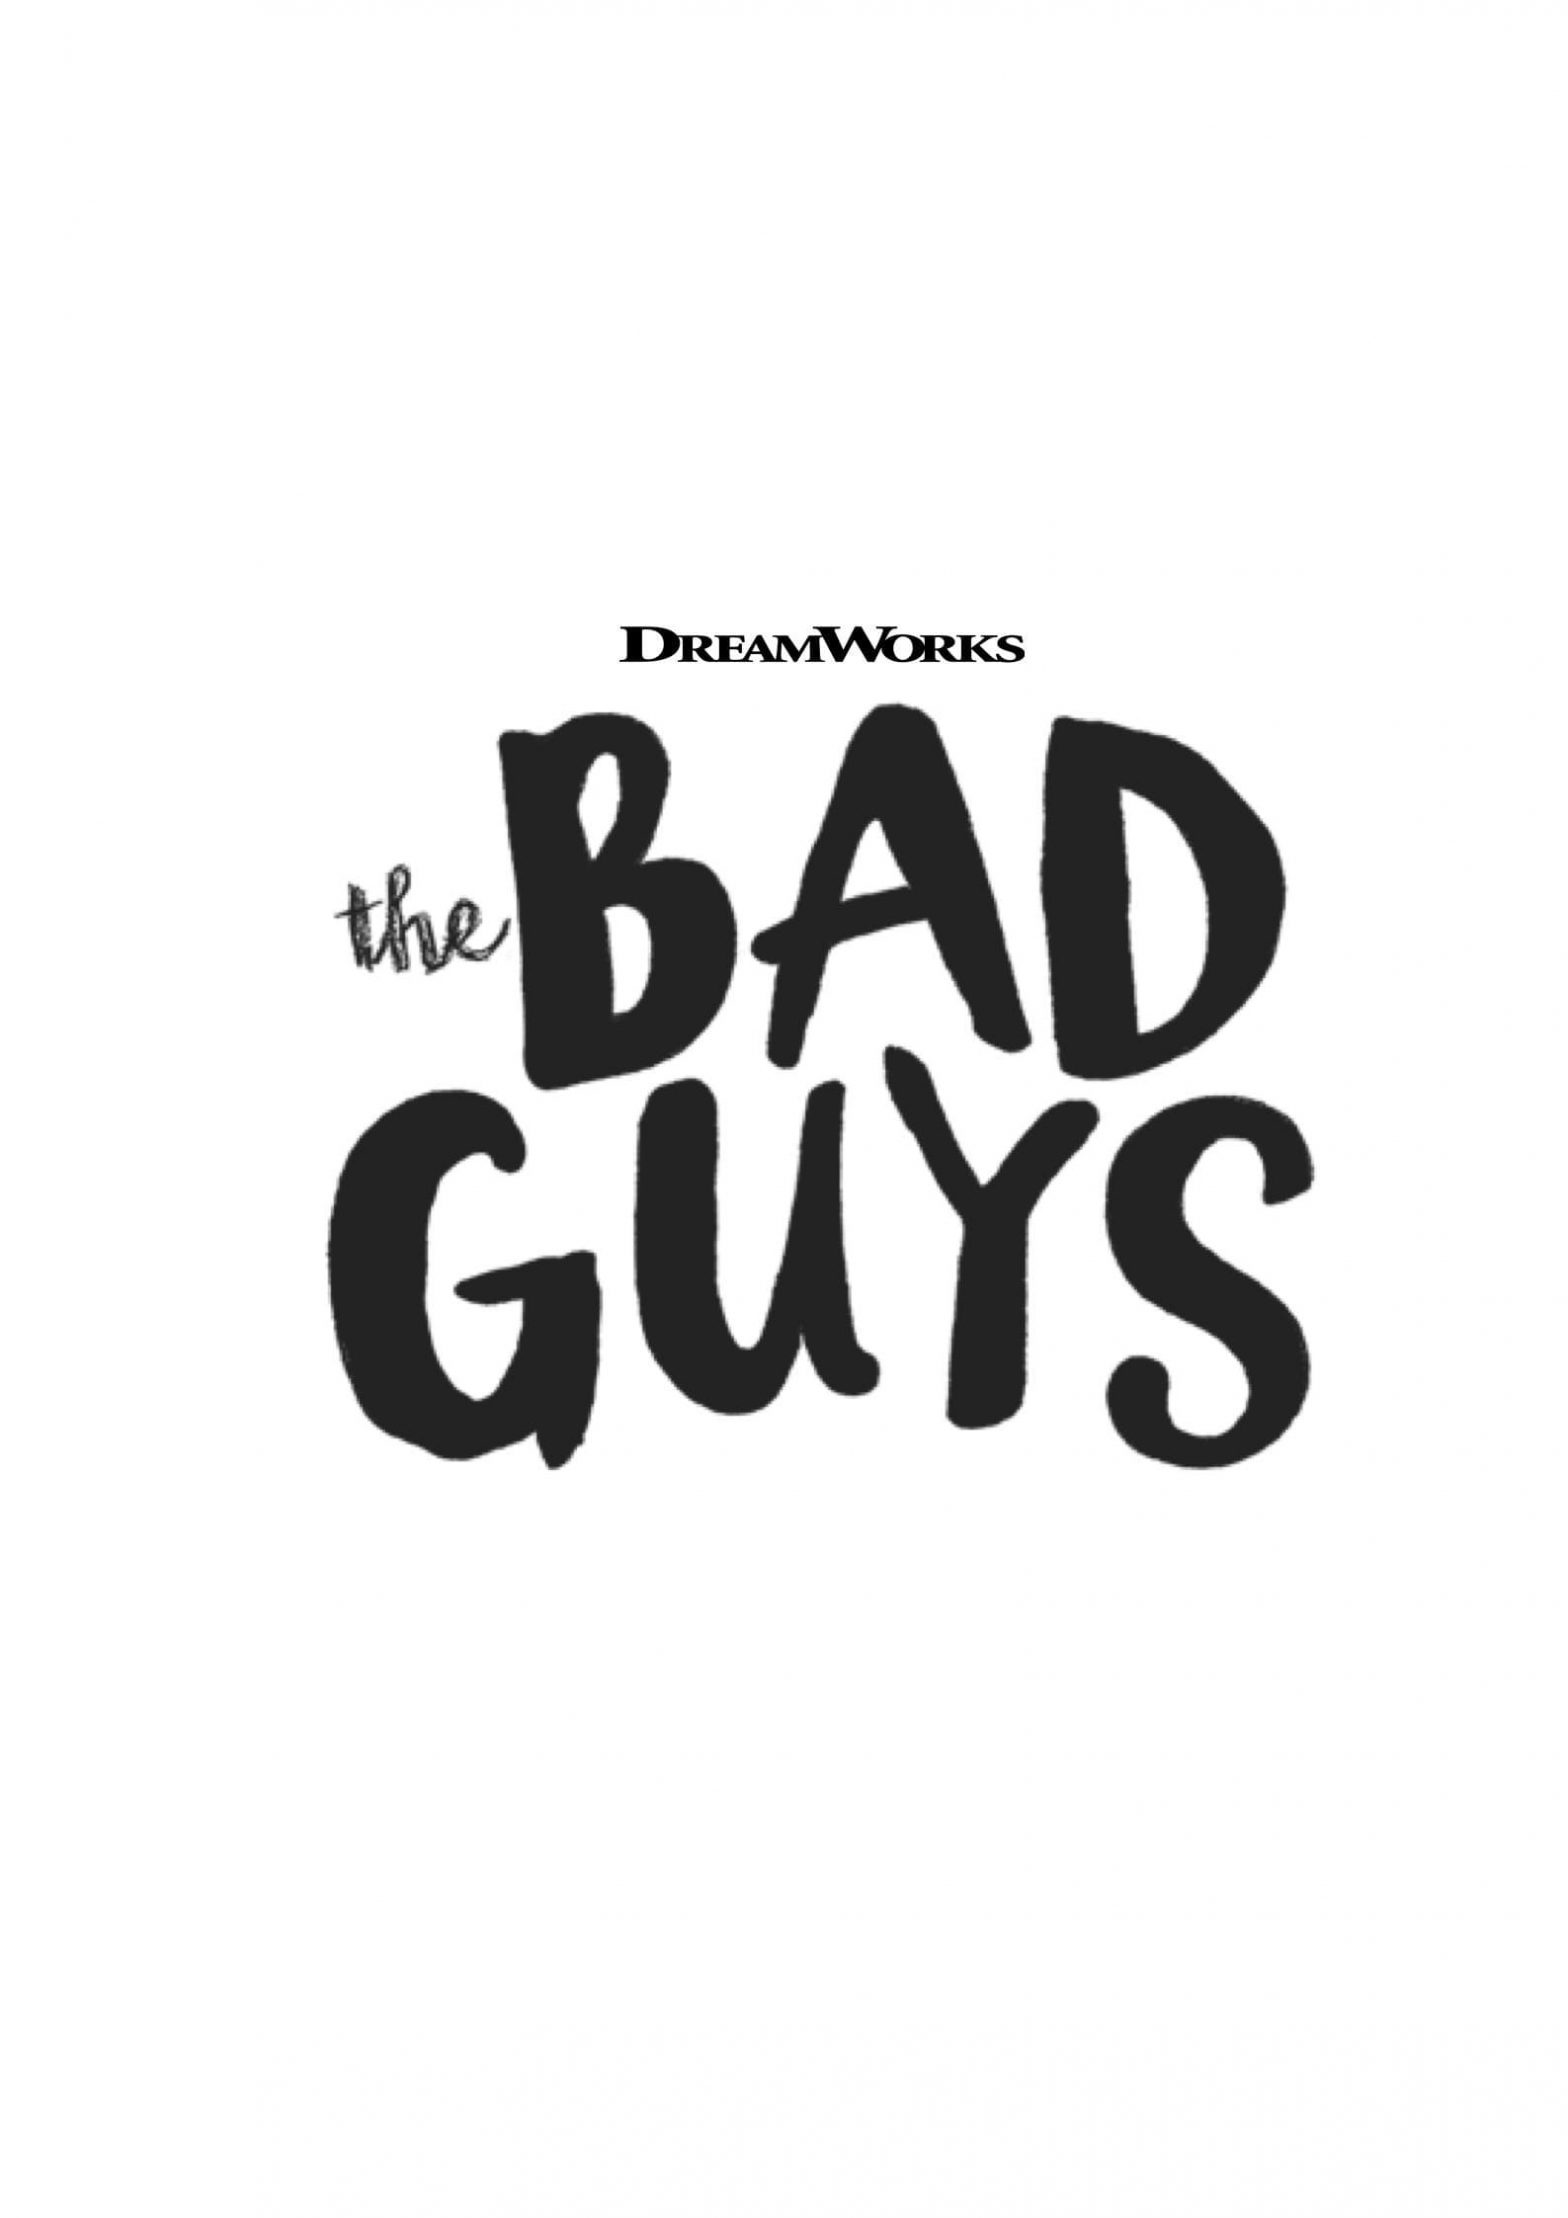 Poster for the movie "The Bad Guys"